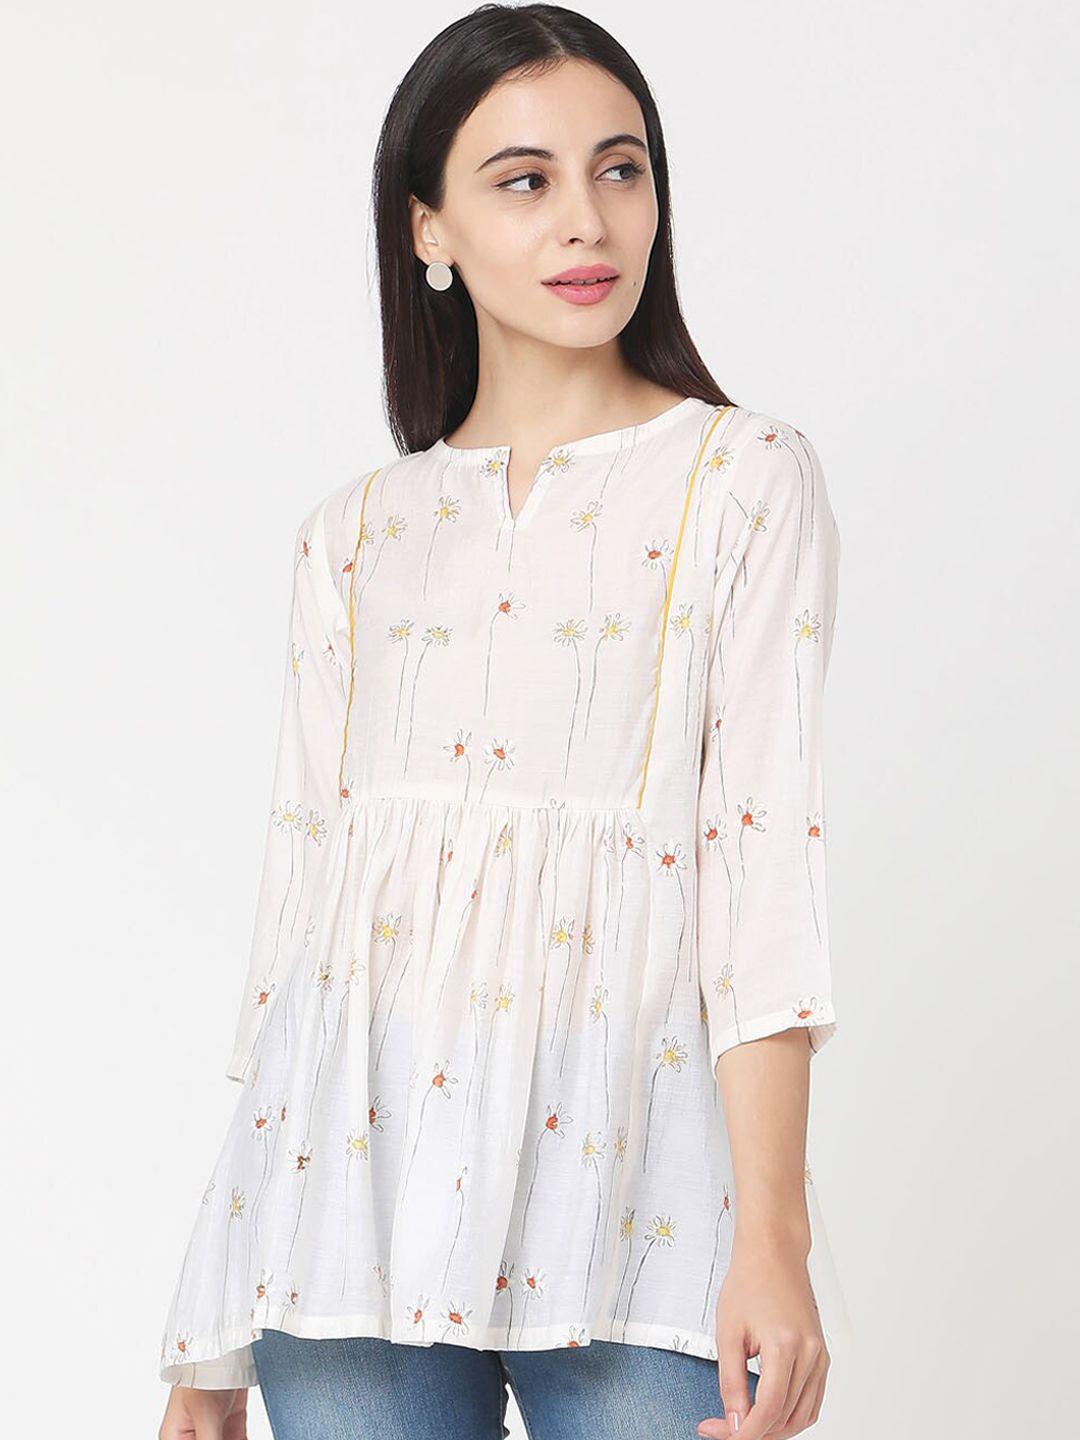 saanjh-women-white-&-yellow-floral-printed-tunic